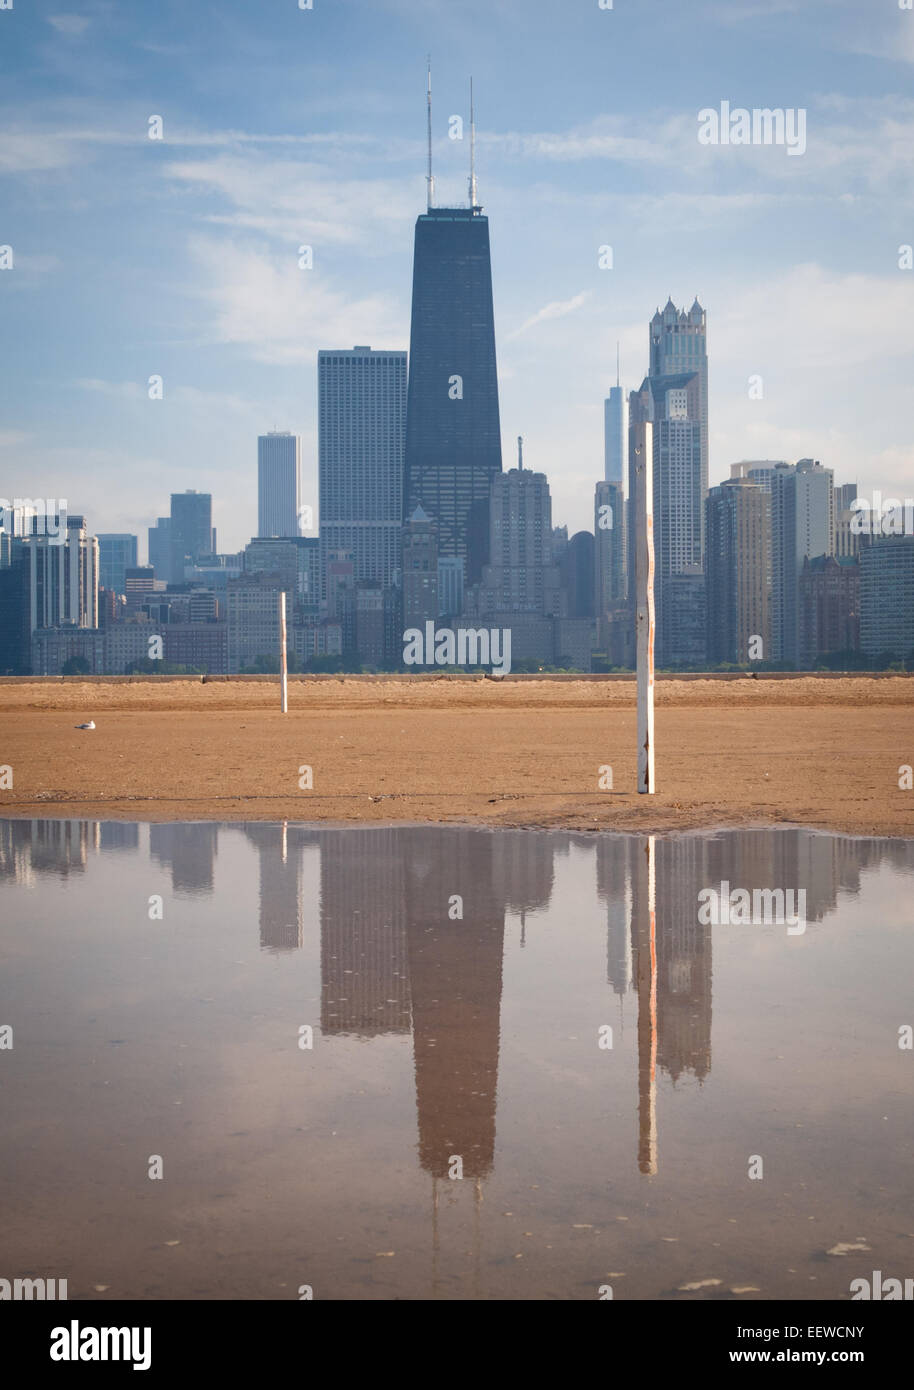 A view of the John Hancock Building and the Chicago skyline as seen from North Avenue Beach.  Chicago, Illinois. Stock Photo